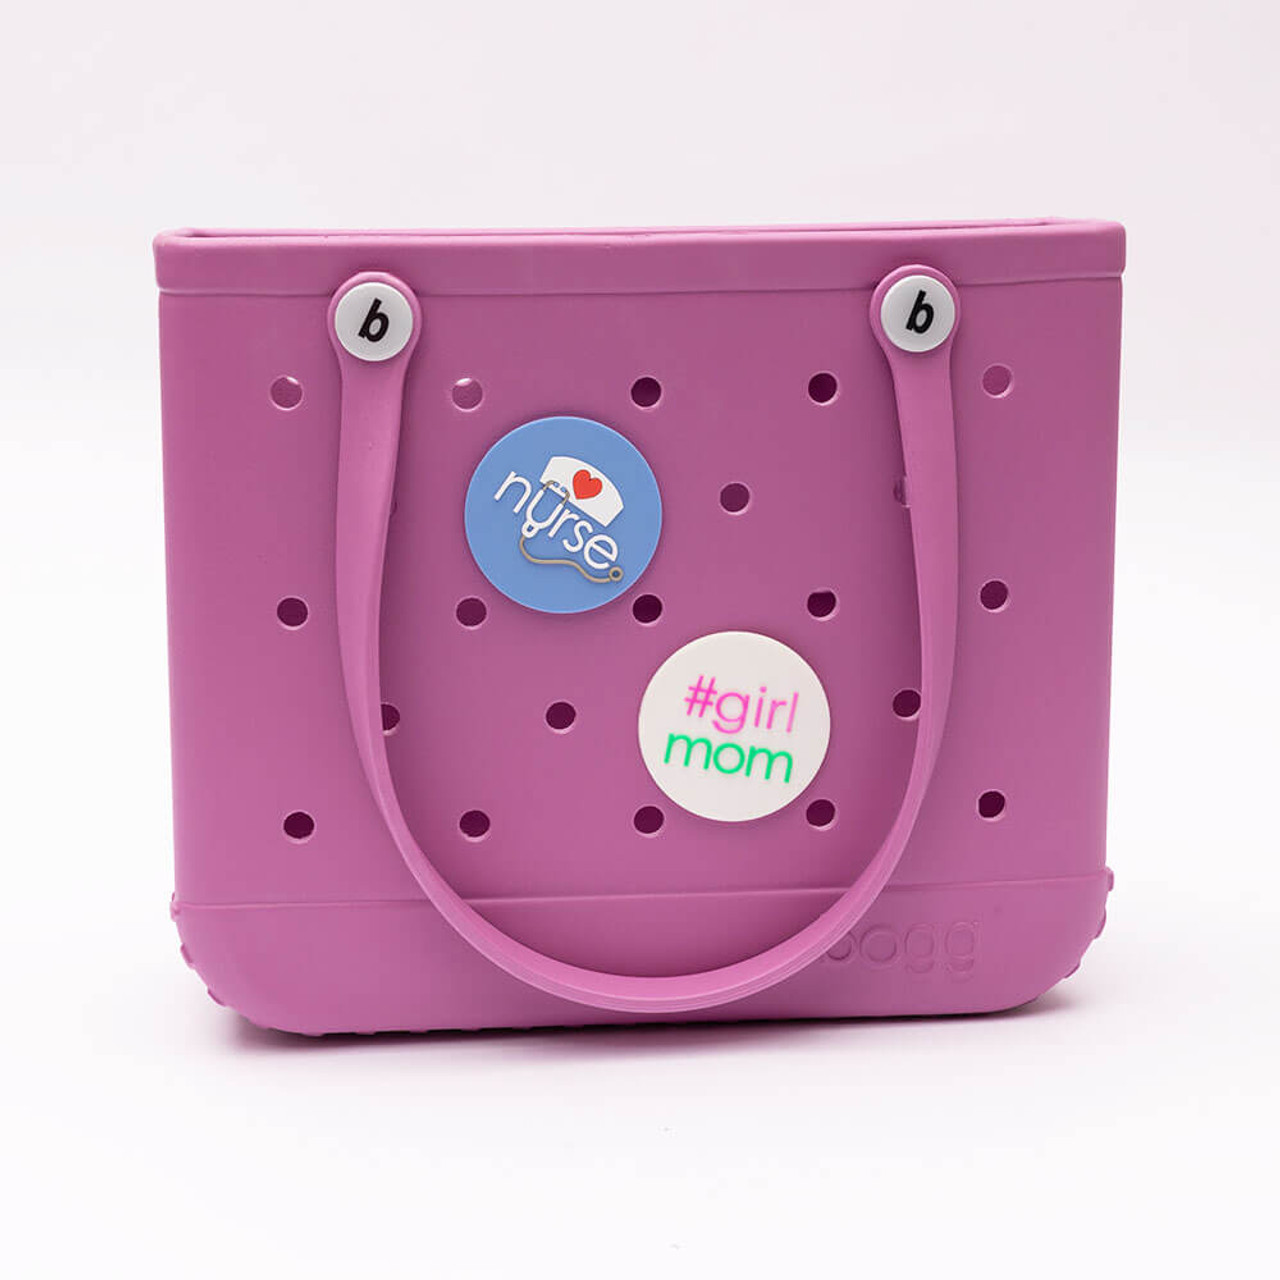 BABY BOGG BAG, MINT CHIP BOGG – PRETTY LITTLE THINGS AT NEW-BOS, INC.